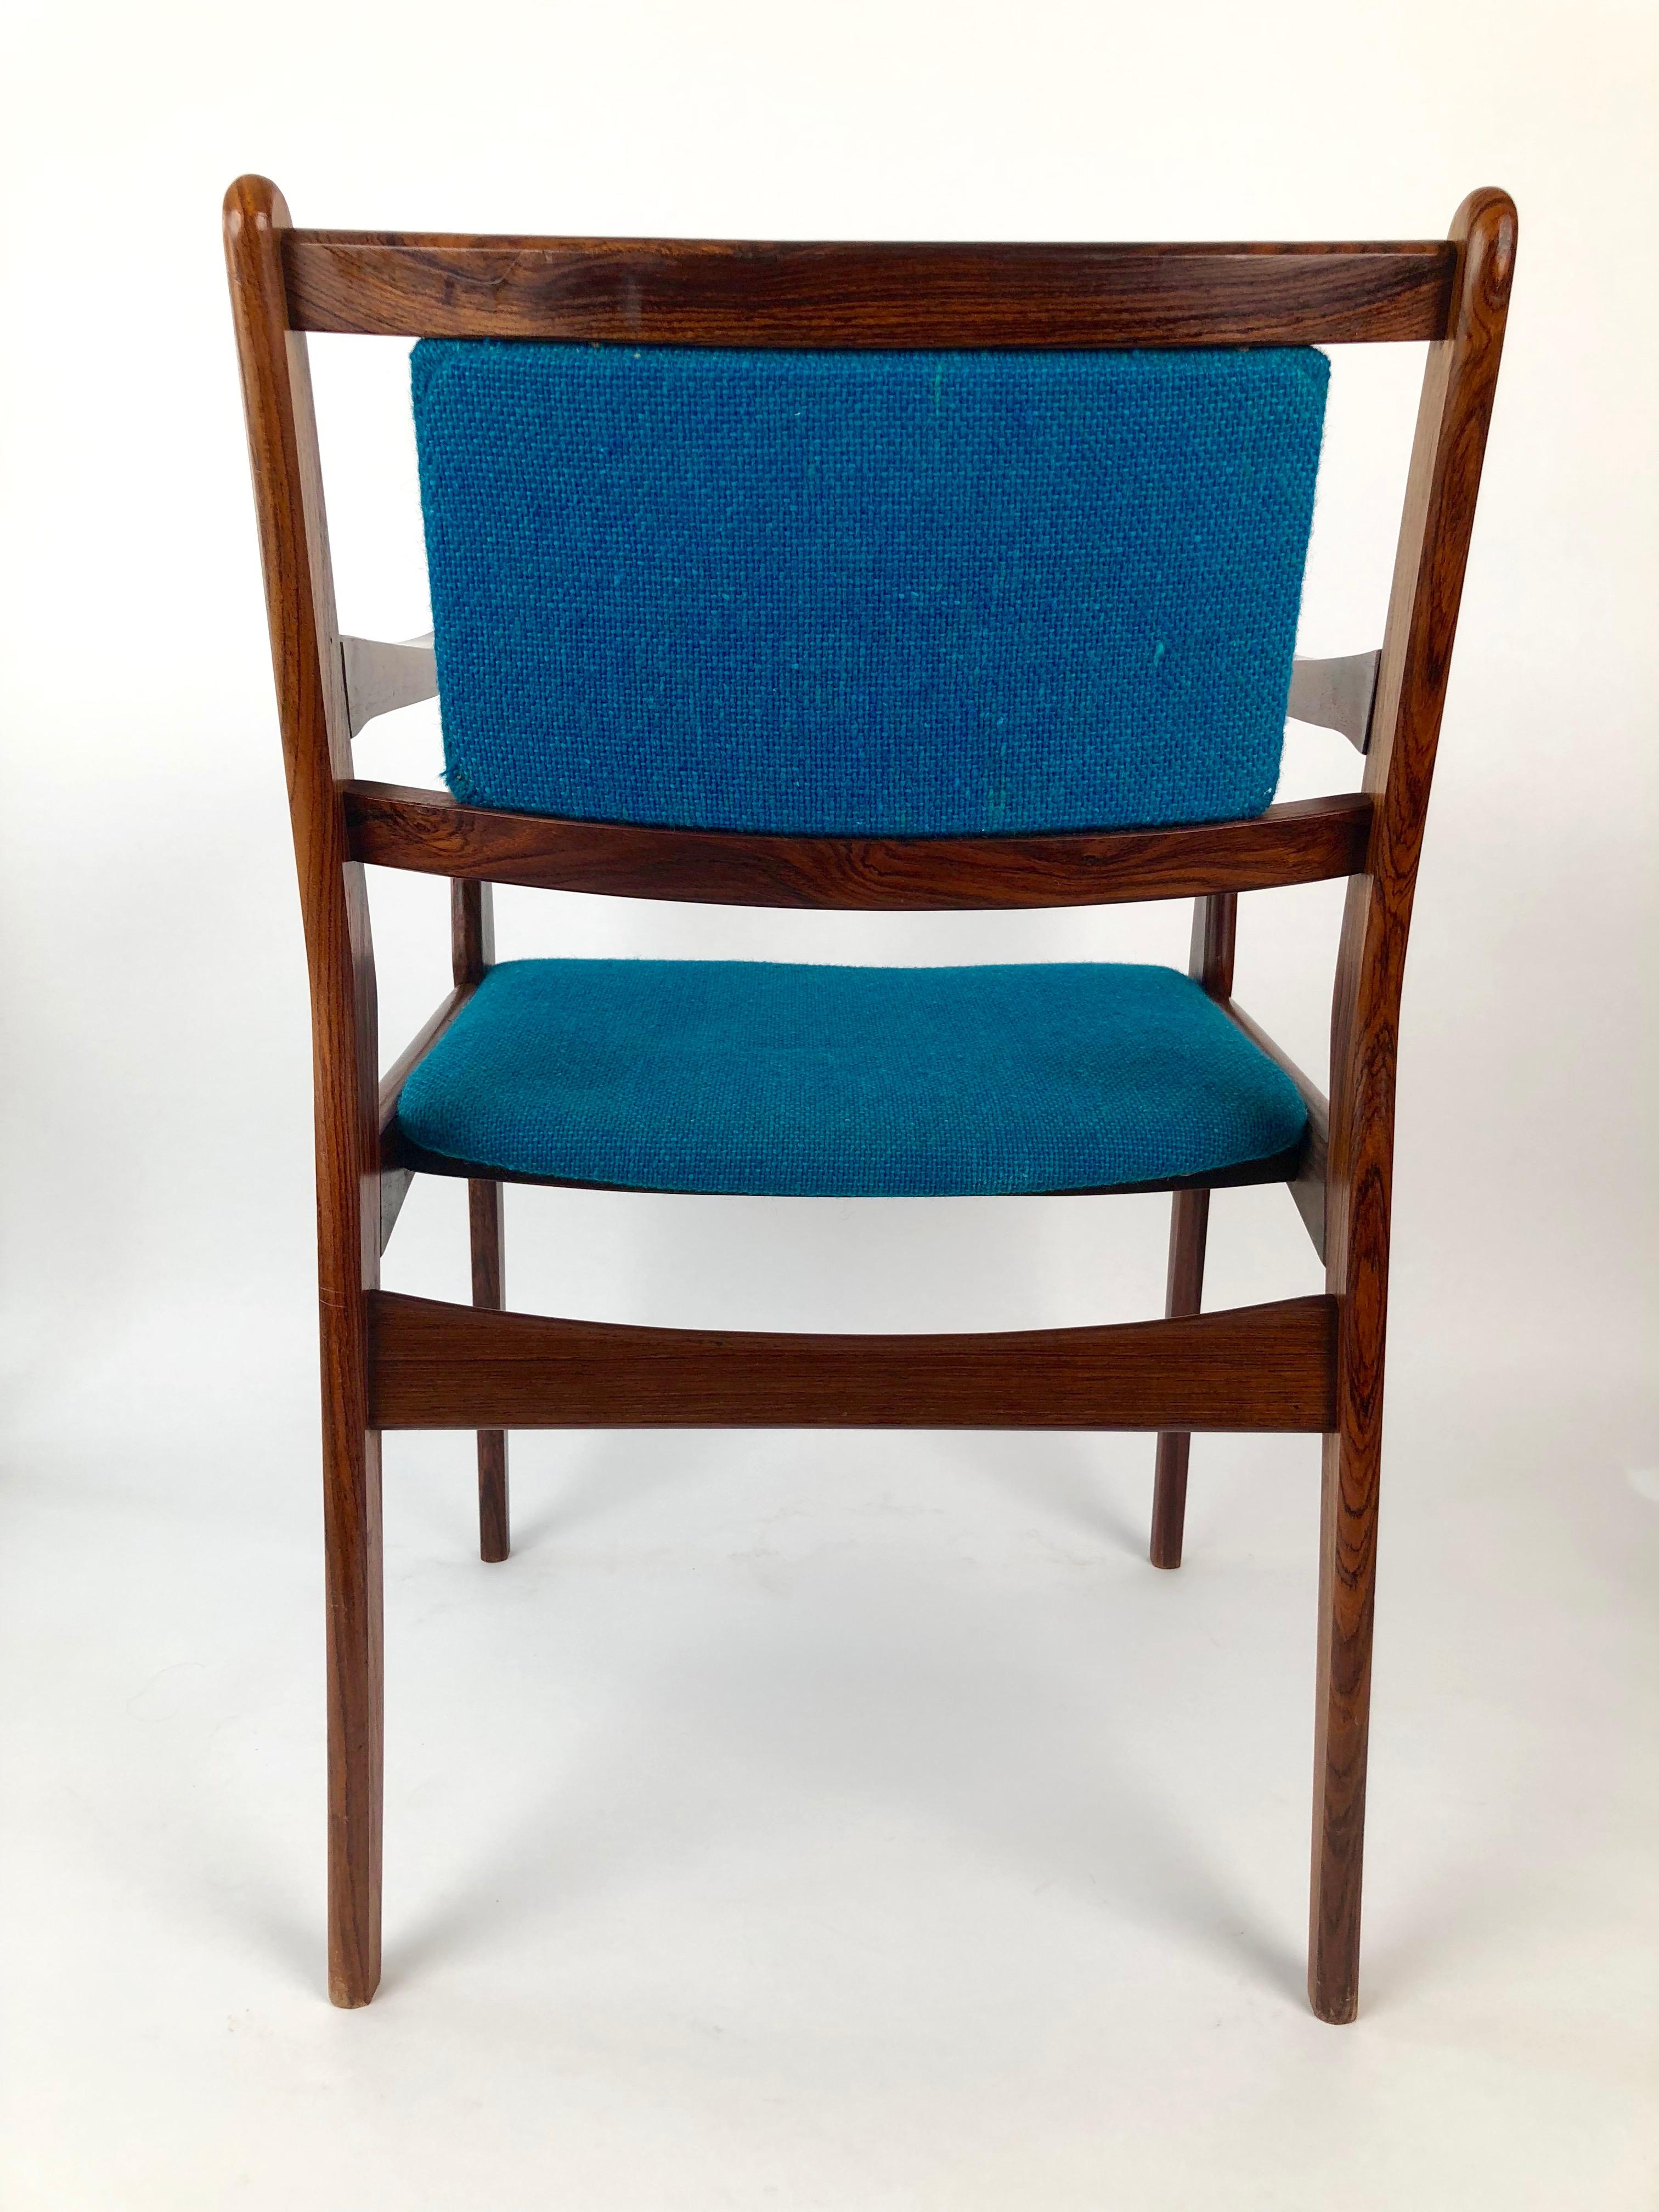 Set of Two Palisander Chairs with Turquoise Fabric from the 1960s In Good Condition For Sale In Vienna, Austria